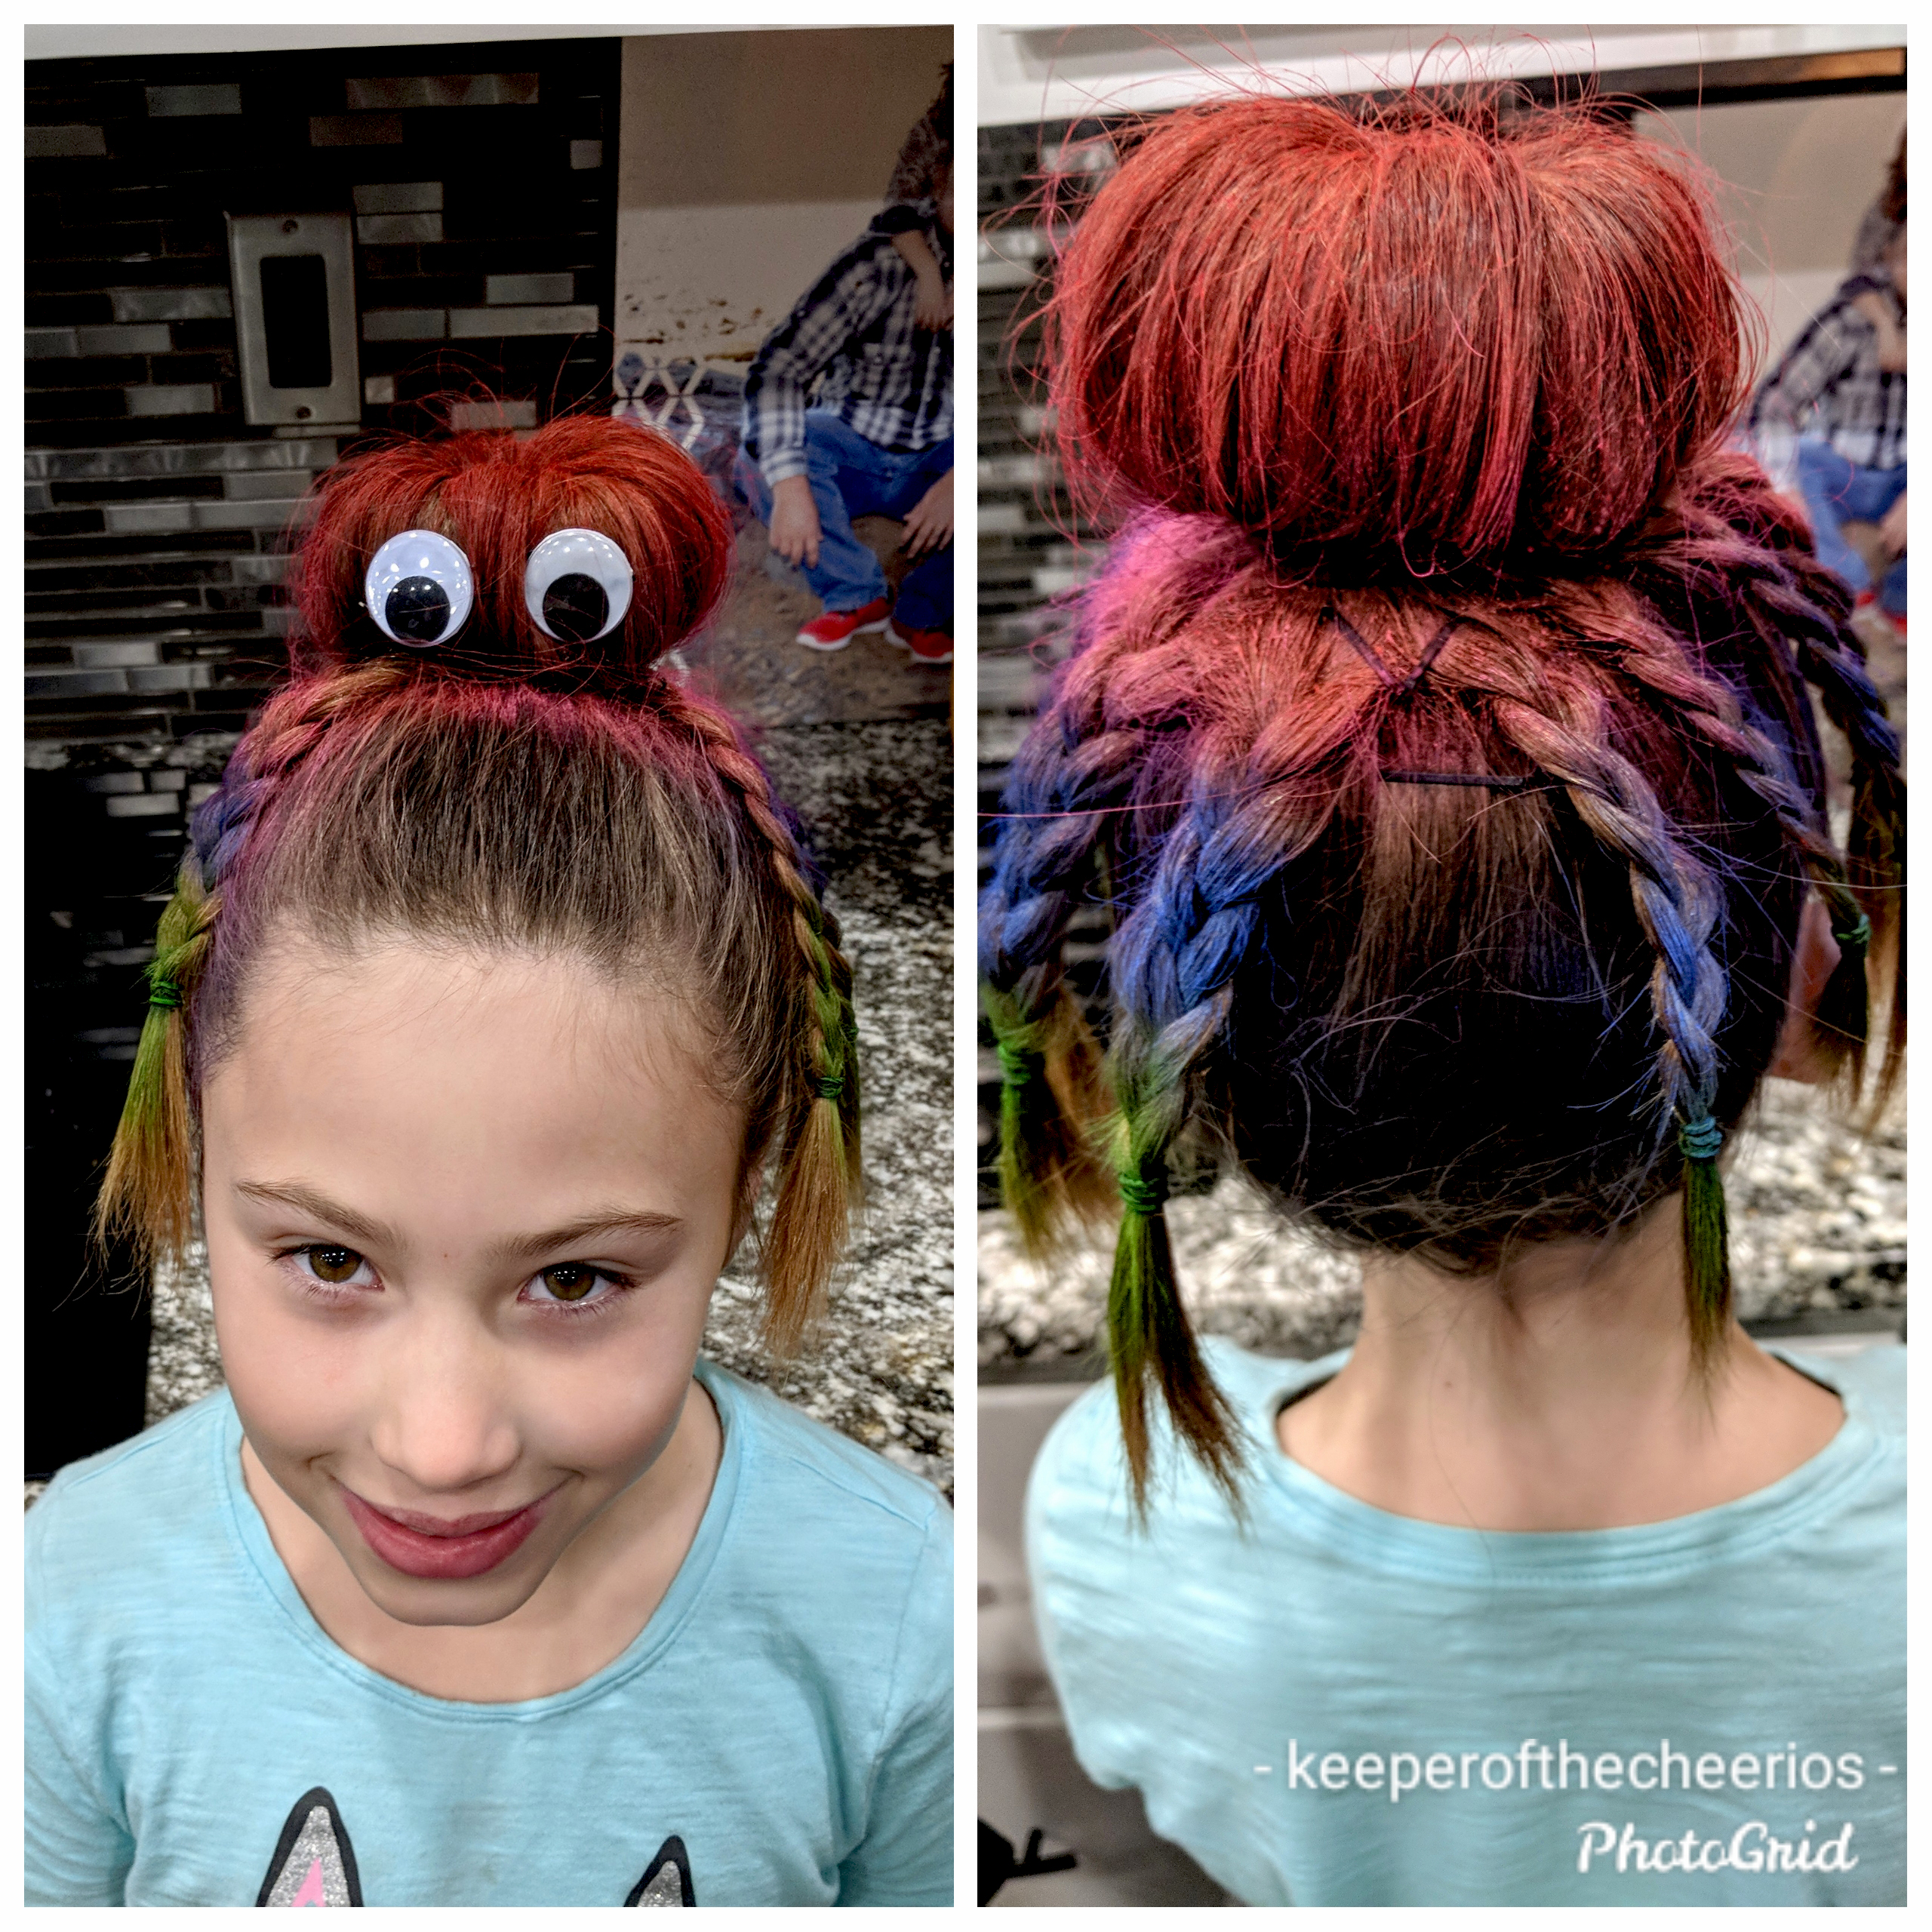 Octopus Crazy Hair - The Keeper of the Cheerios